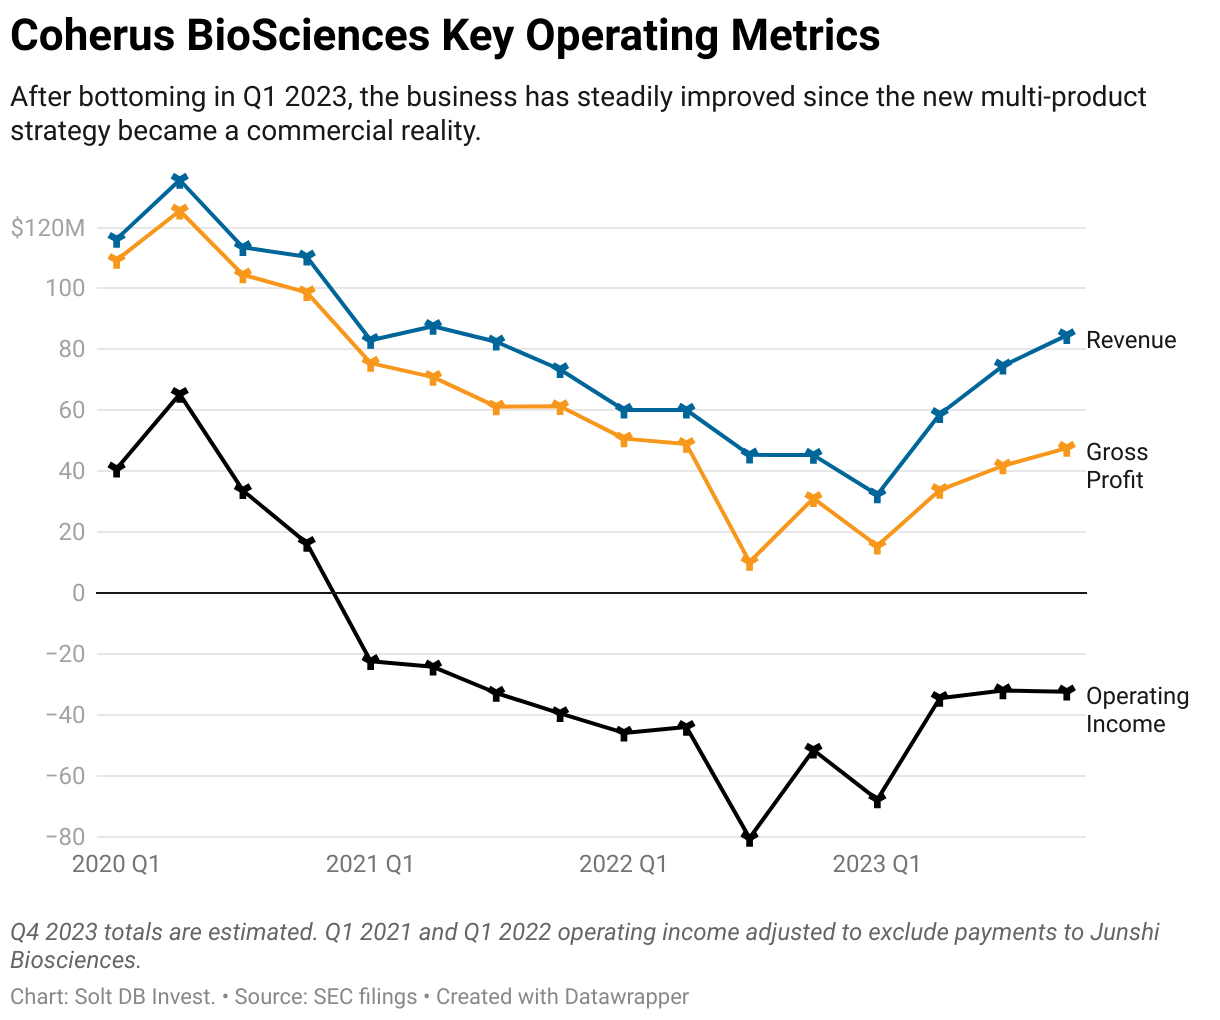 A line graph showing quarterly revenue, gross profit, ad operating income at Coherus BioSciences from Q1 2020 to Q3 2023.